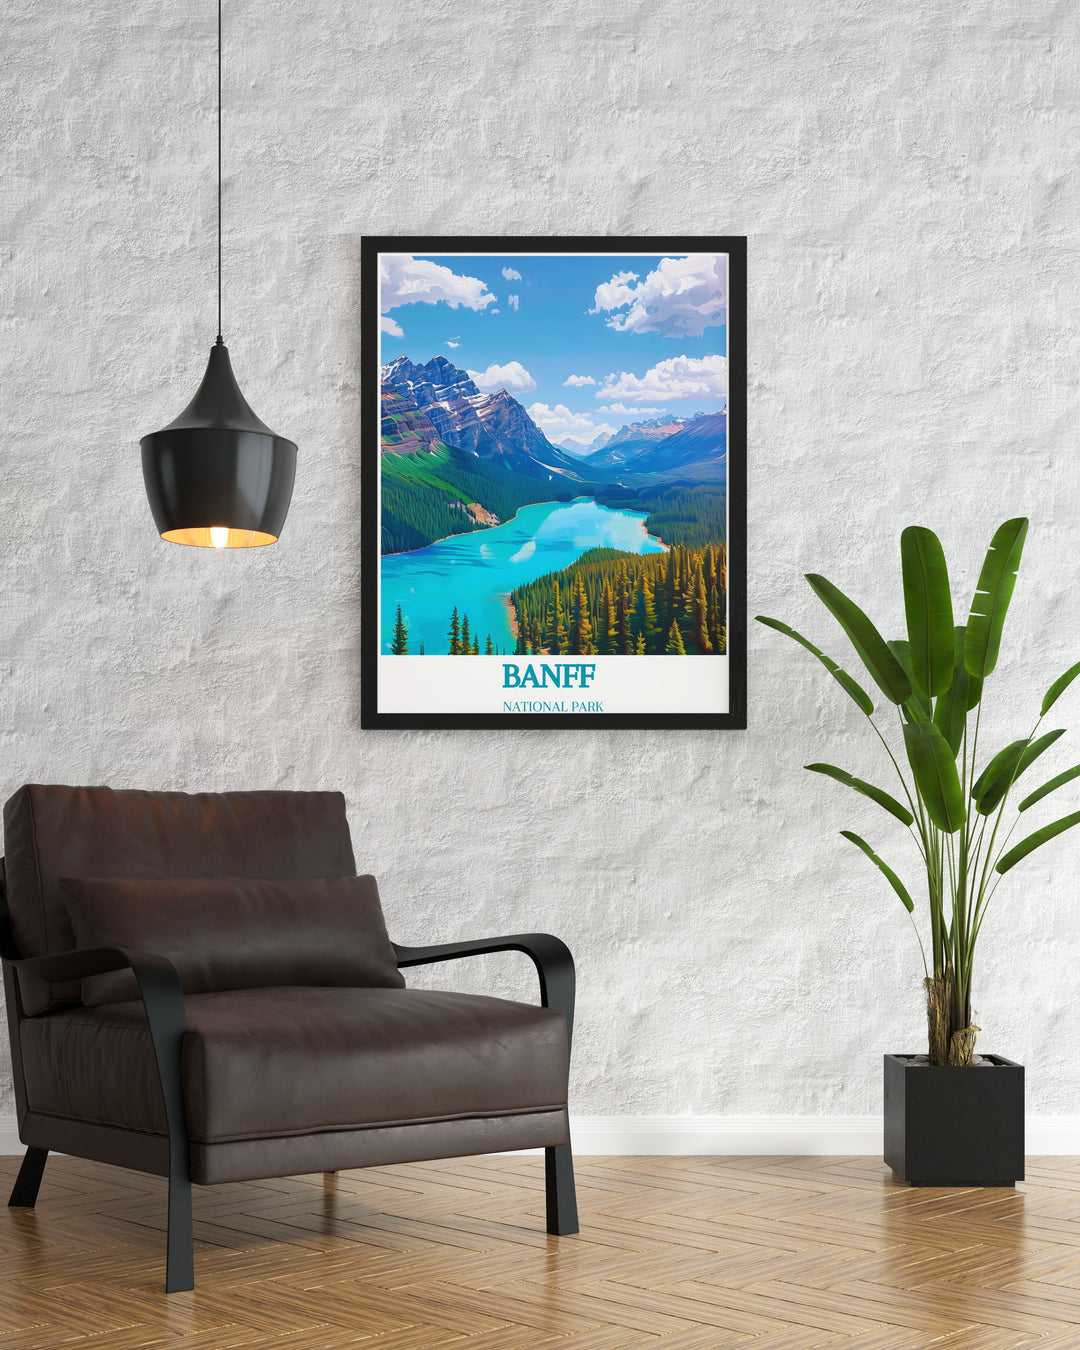 High quality print of Peyto Lake during the vibrant summer months, showcasing the lakes intense blue waters contrasted against a lush forest backdrop, perfect for adding a touch of natures majesty to any home decor.